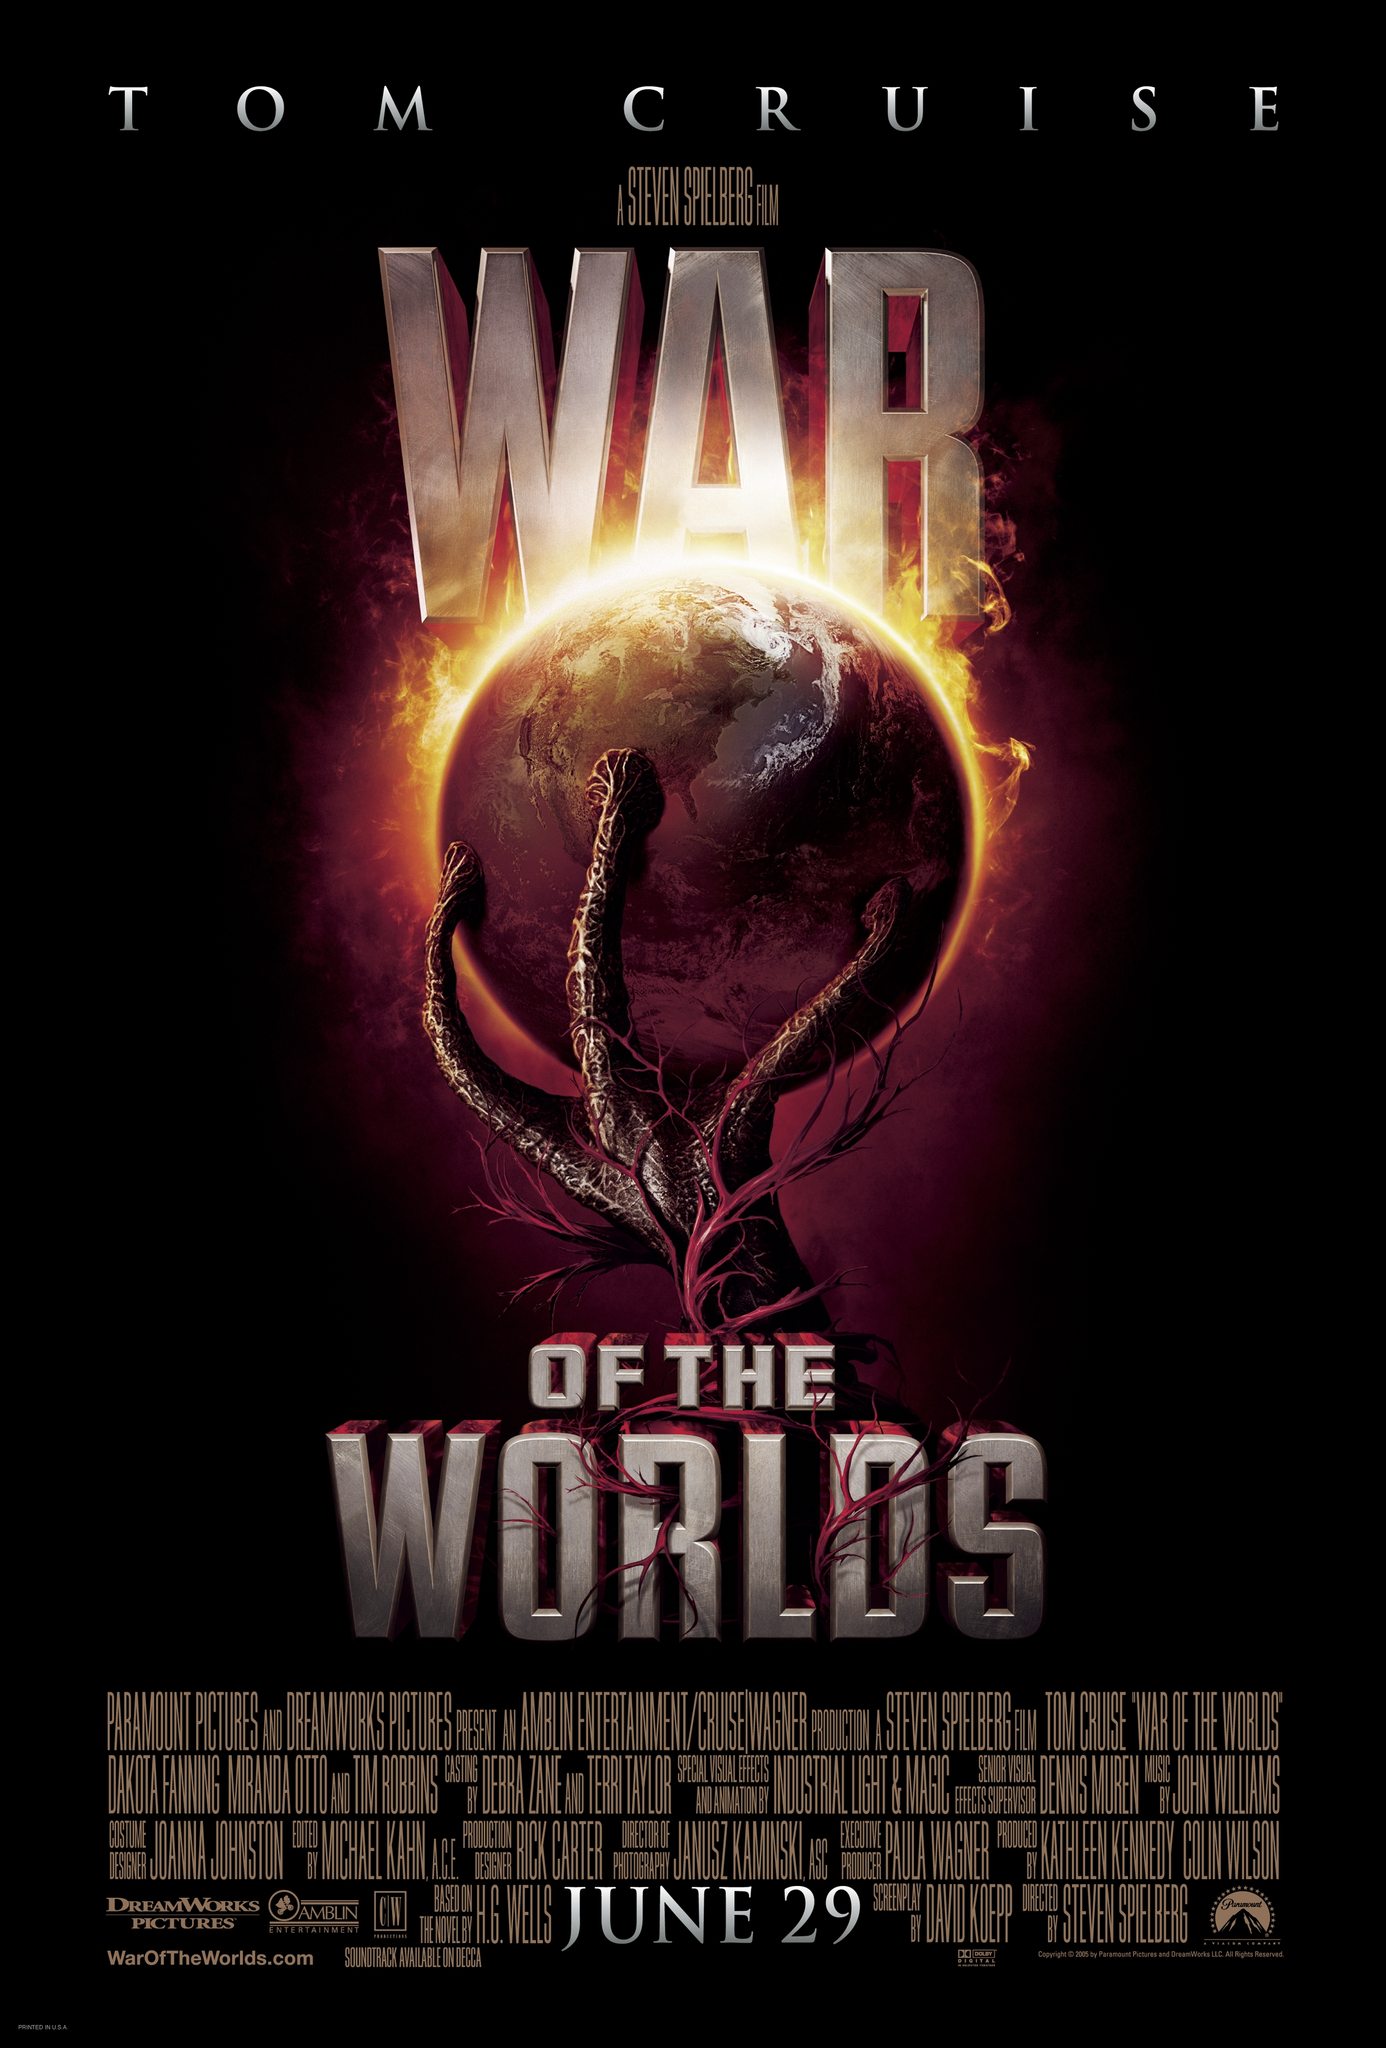 "War of the Worlds" (2005)